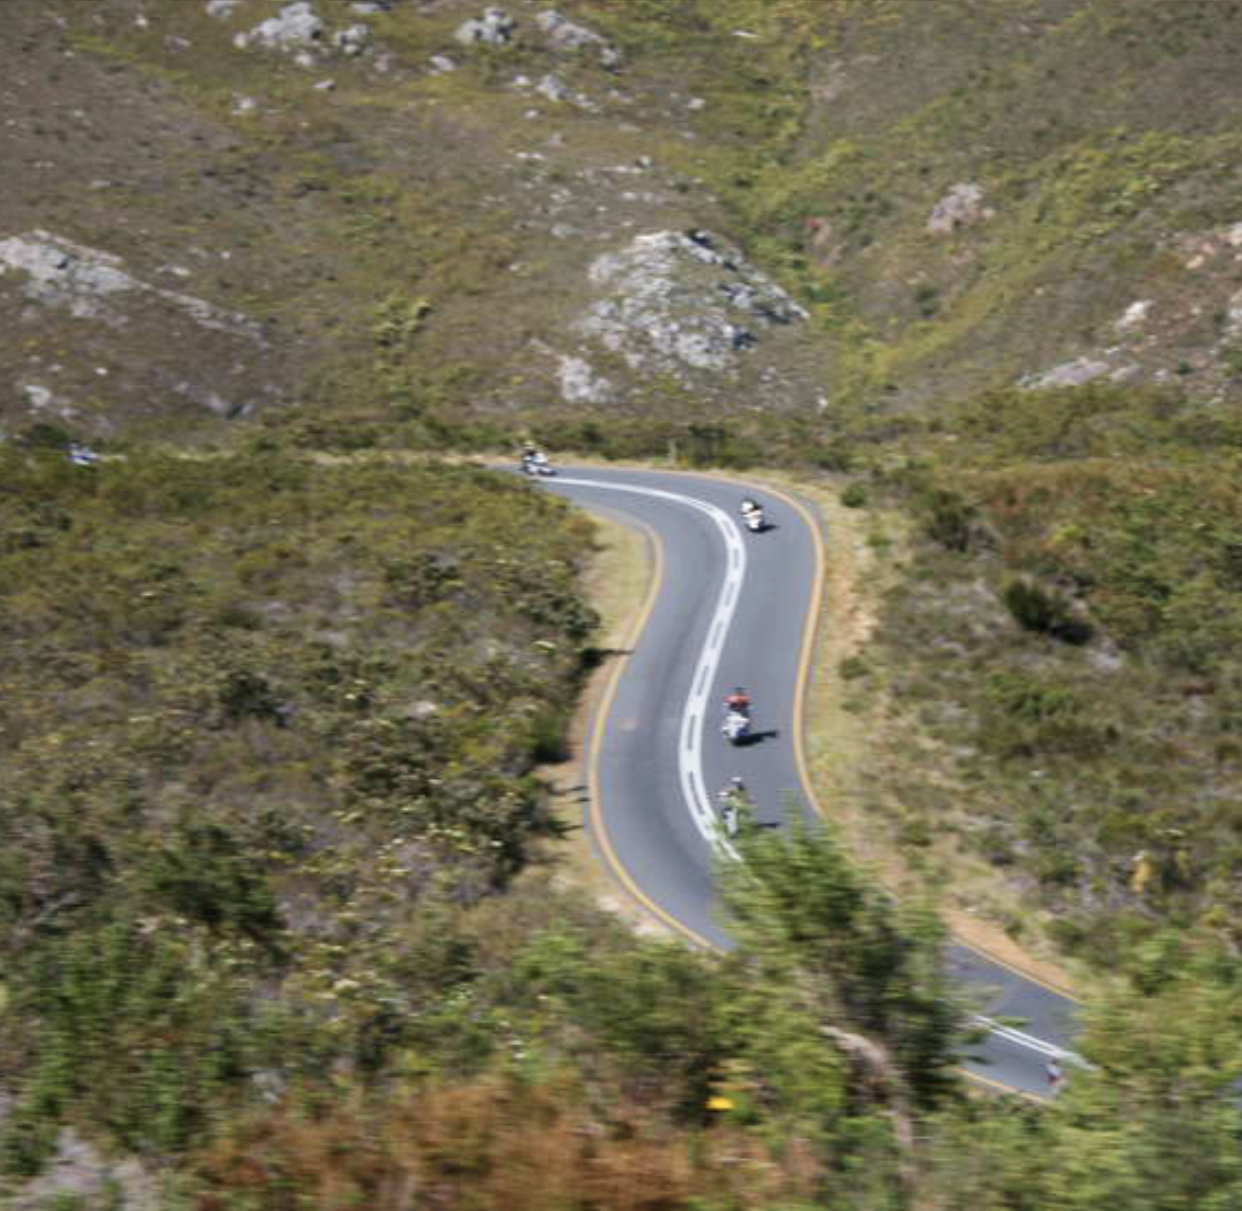 South Africa trip motorcycles